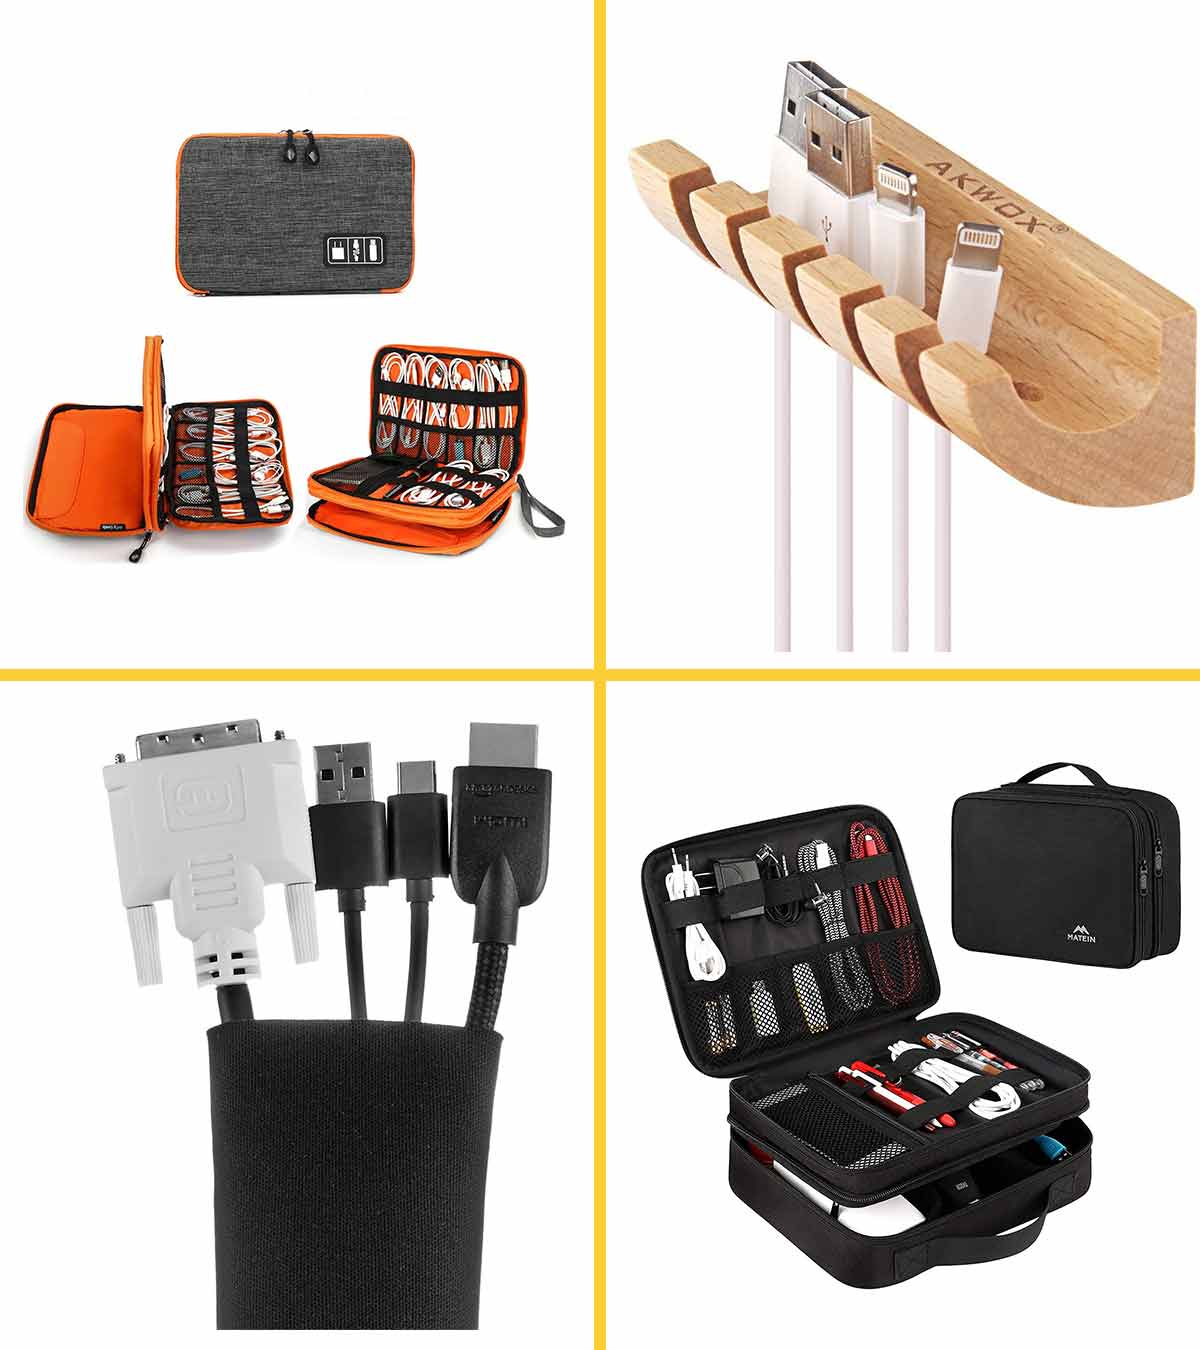 https://www.momjunction.com/wp-content/uploads/2020/11/13-Best-Bag-Cable-Organizers-in-2020.jpg